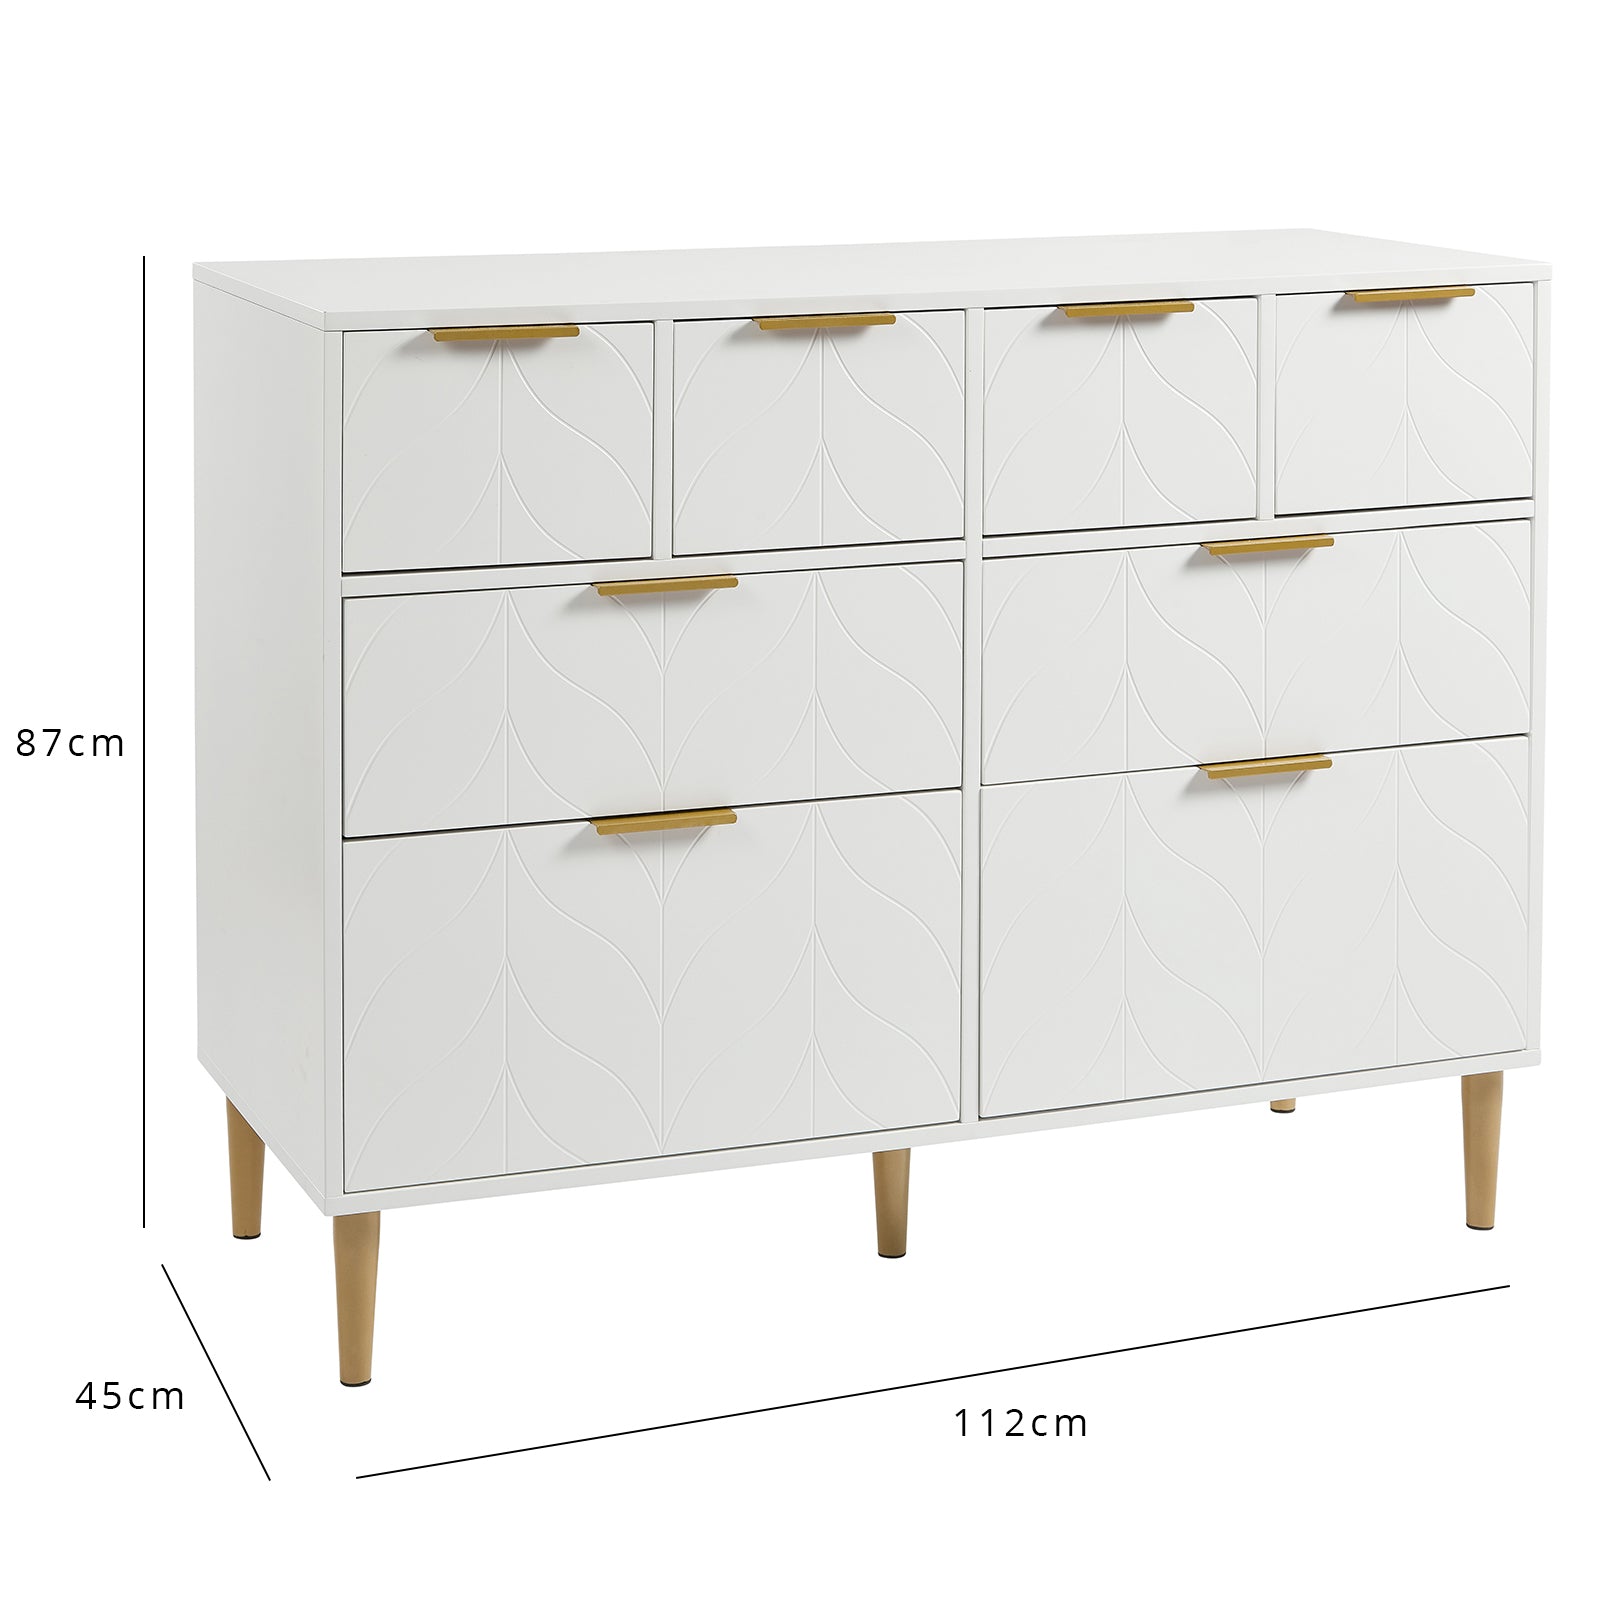 Gloria chest of drawers - 4 over 4 - white & brass effect - laura James